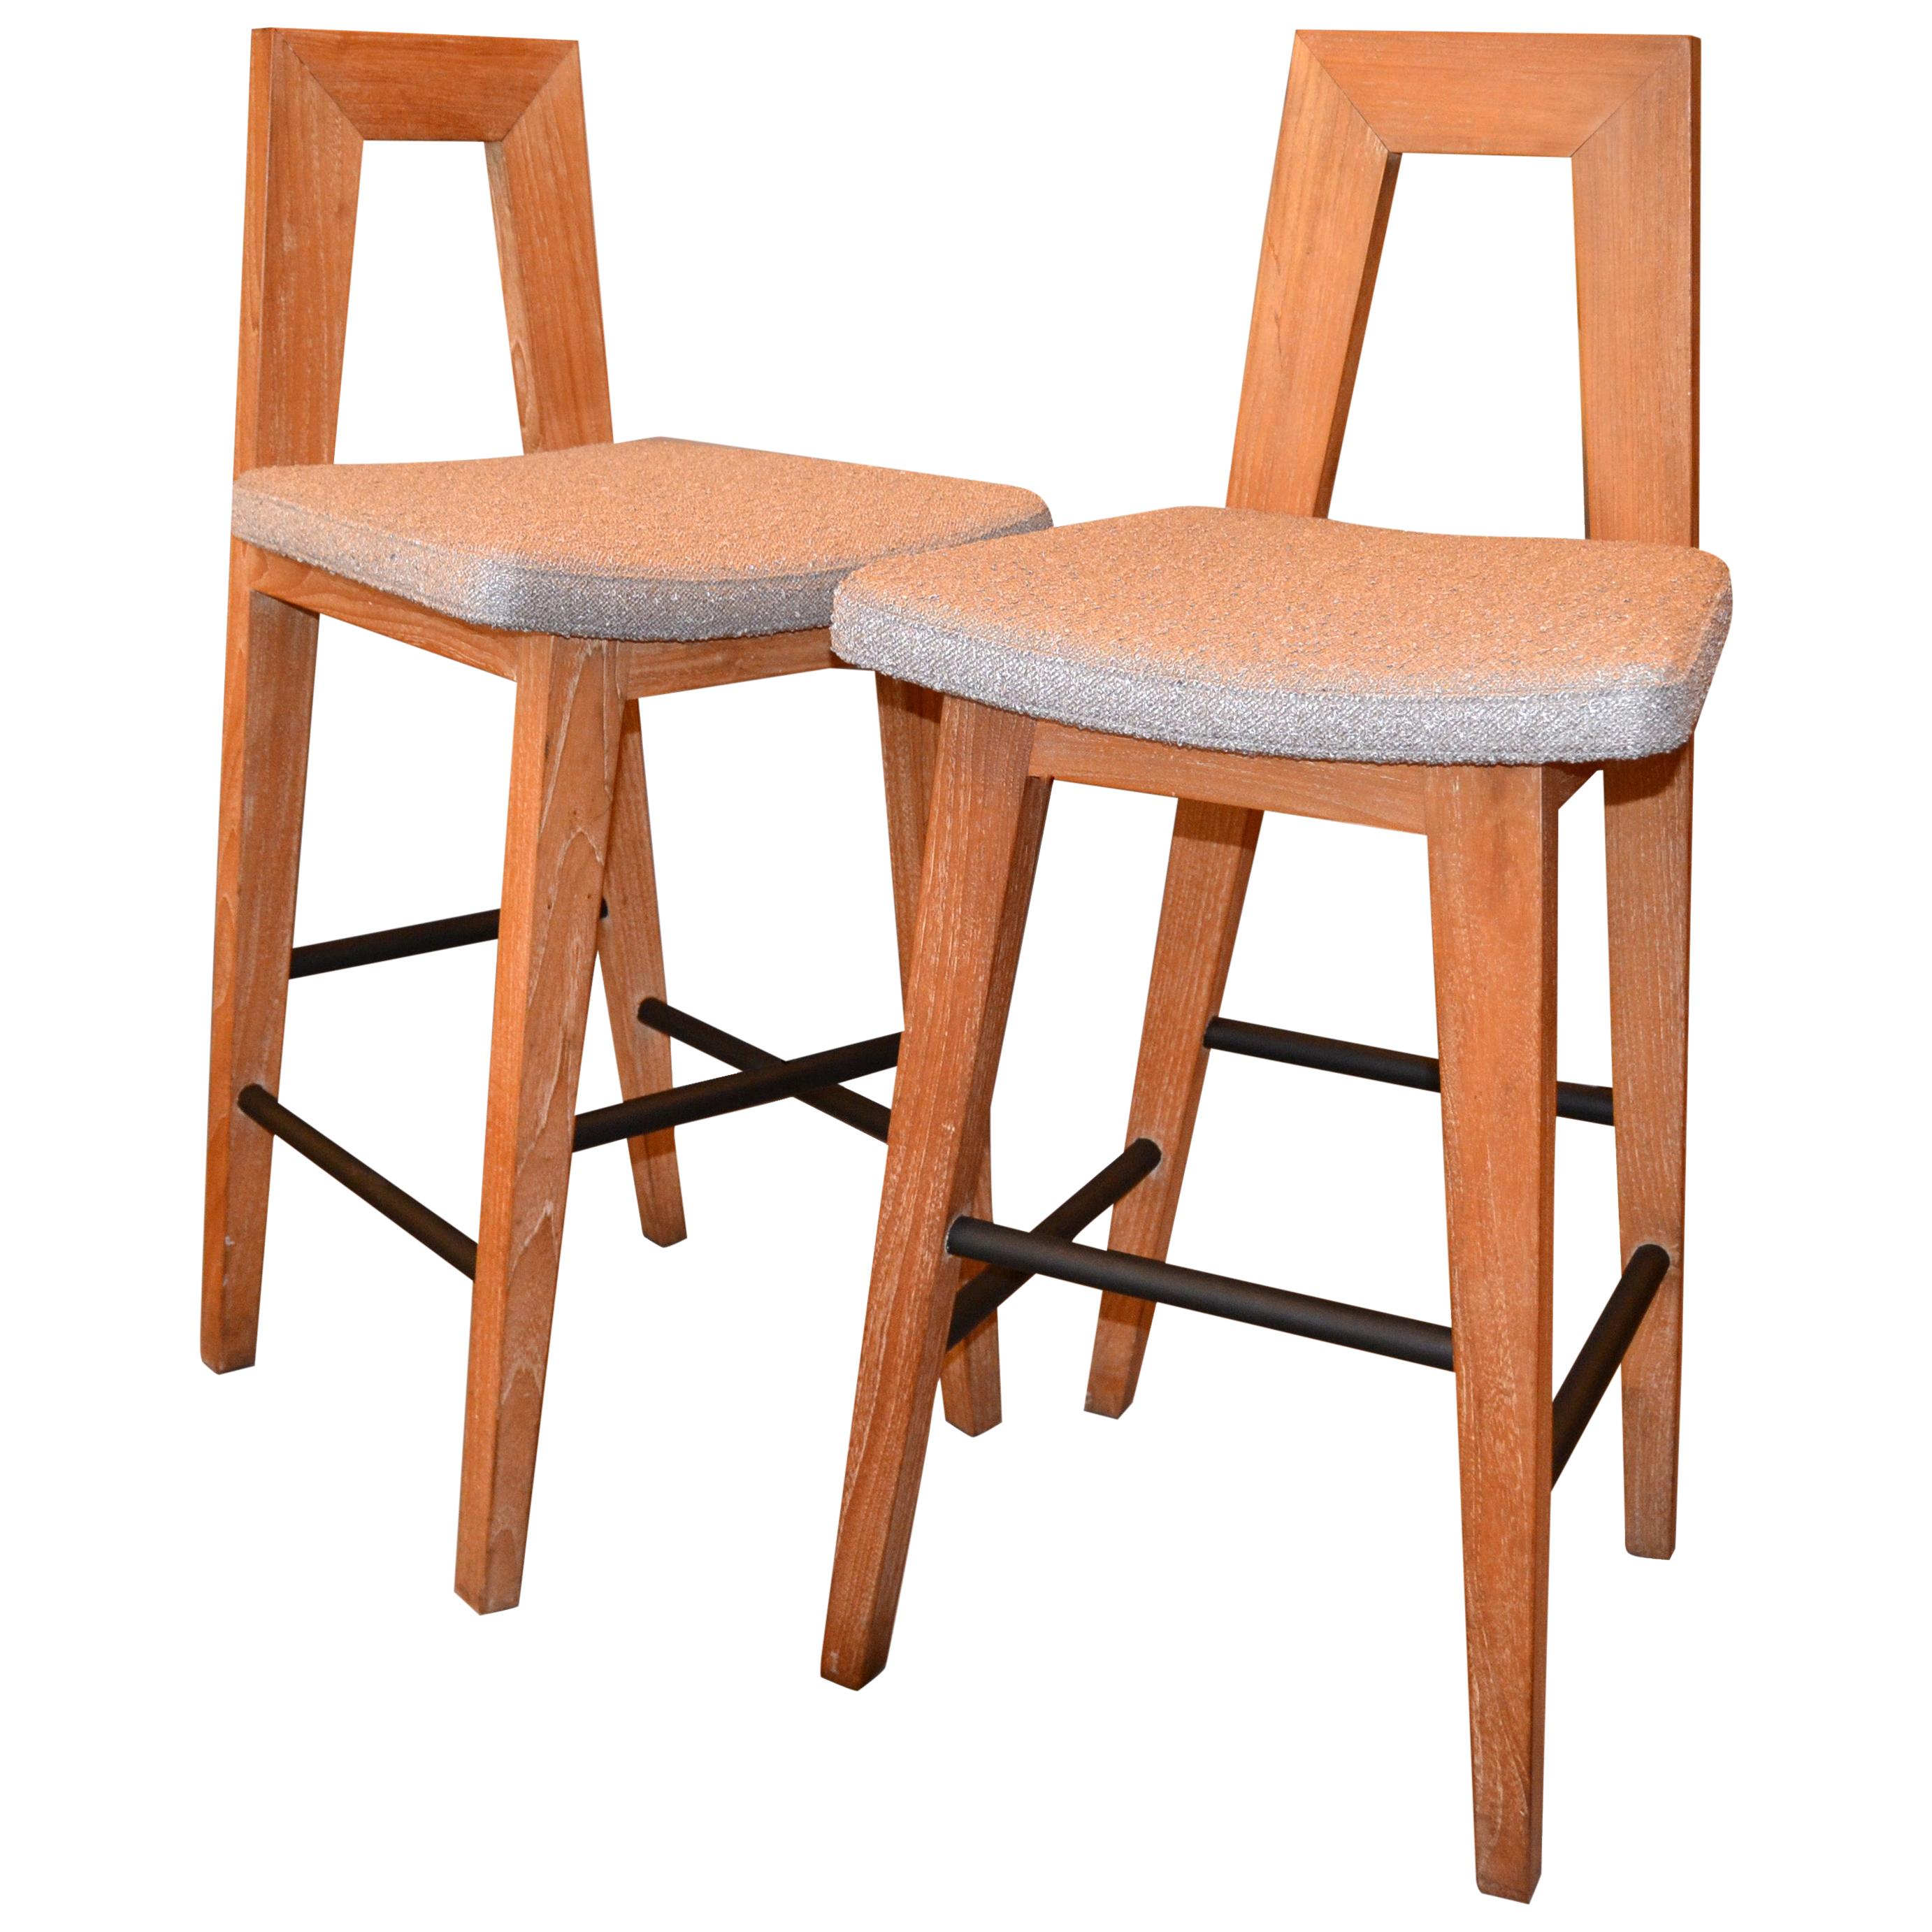 Pair of American White Oak and Fabric Mid-Century Modern Counter Height Stools